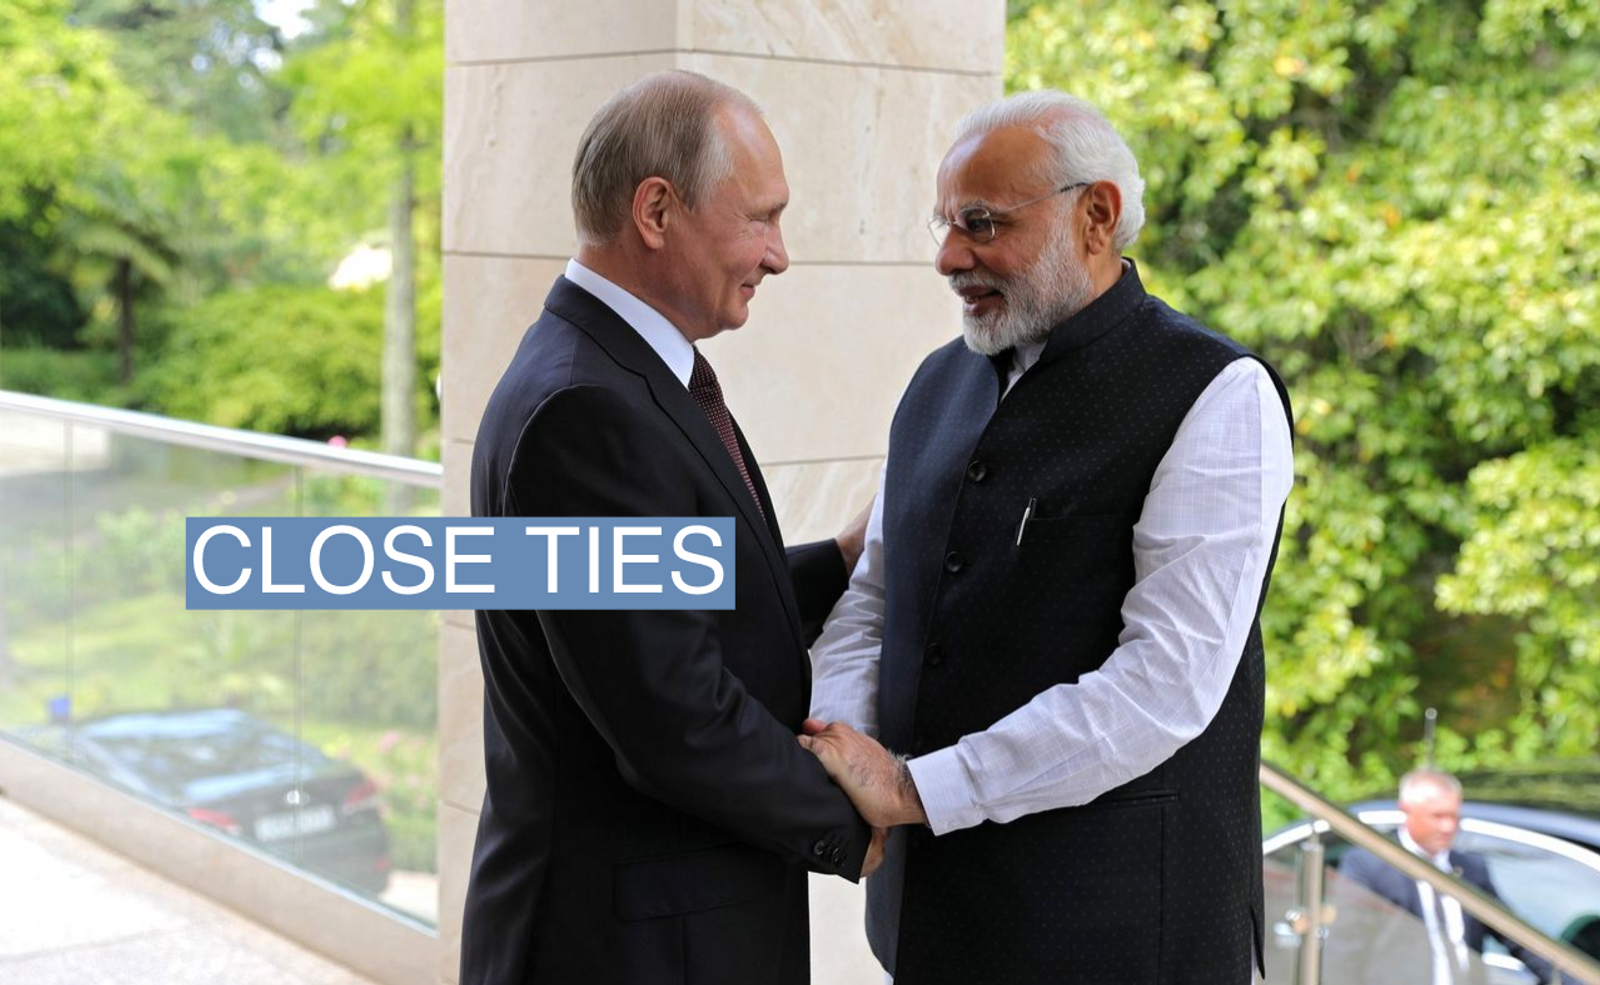 Russian President Vladimir Putin shakes hands with Indian Prime Minister Narendra Modi in this image from 2018.